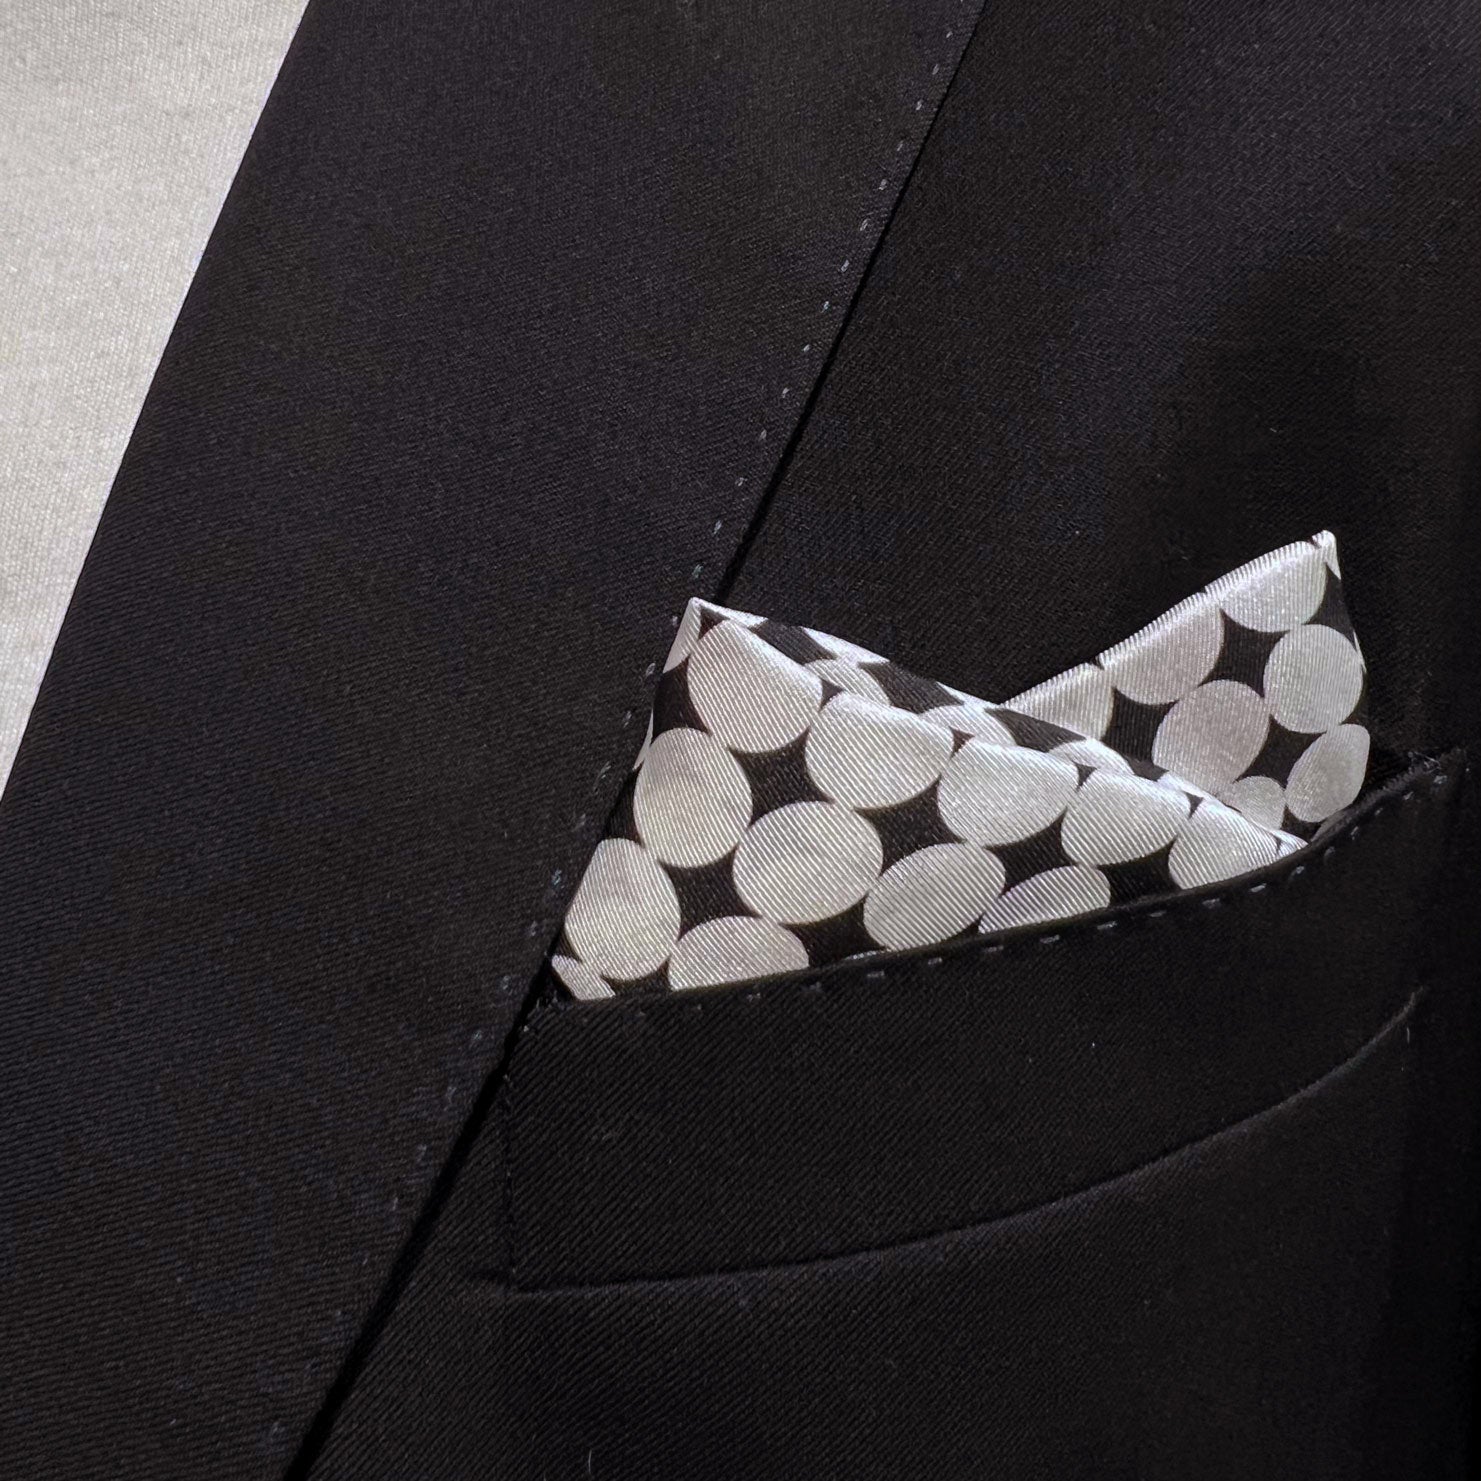 Close-up of  'Keaton' silk pocket square with white disc patterns in breast pocket of dark suit jacket.